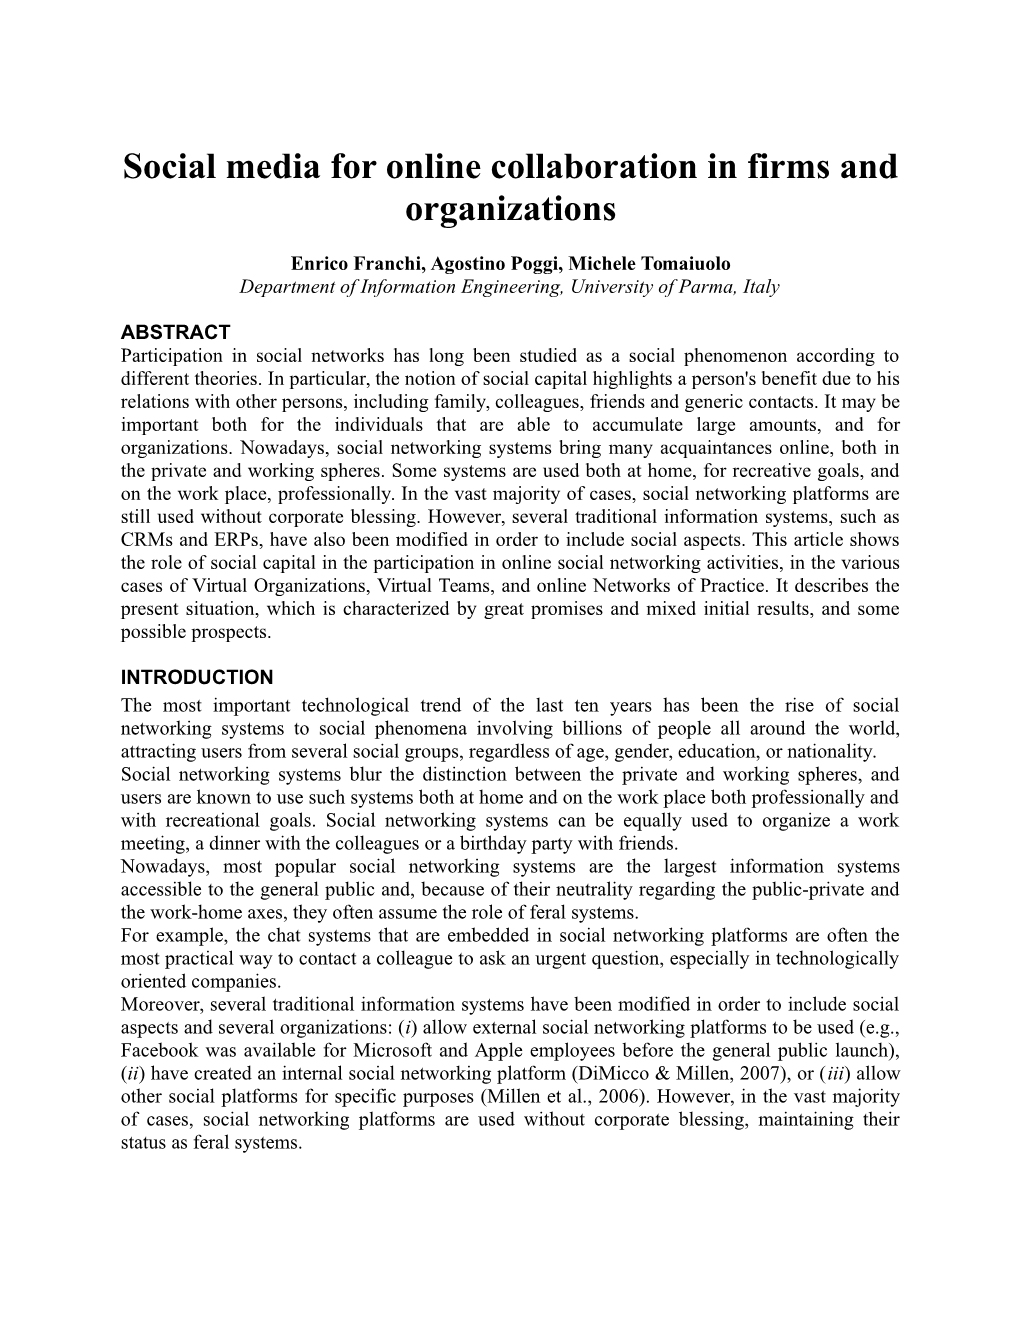 Social Media for Online Collaboration in Firms and Organizations